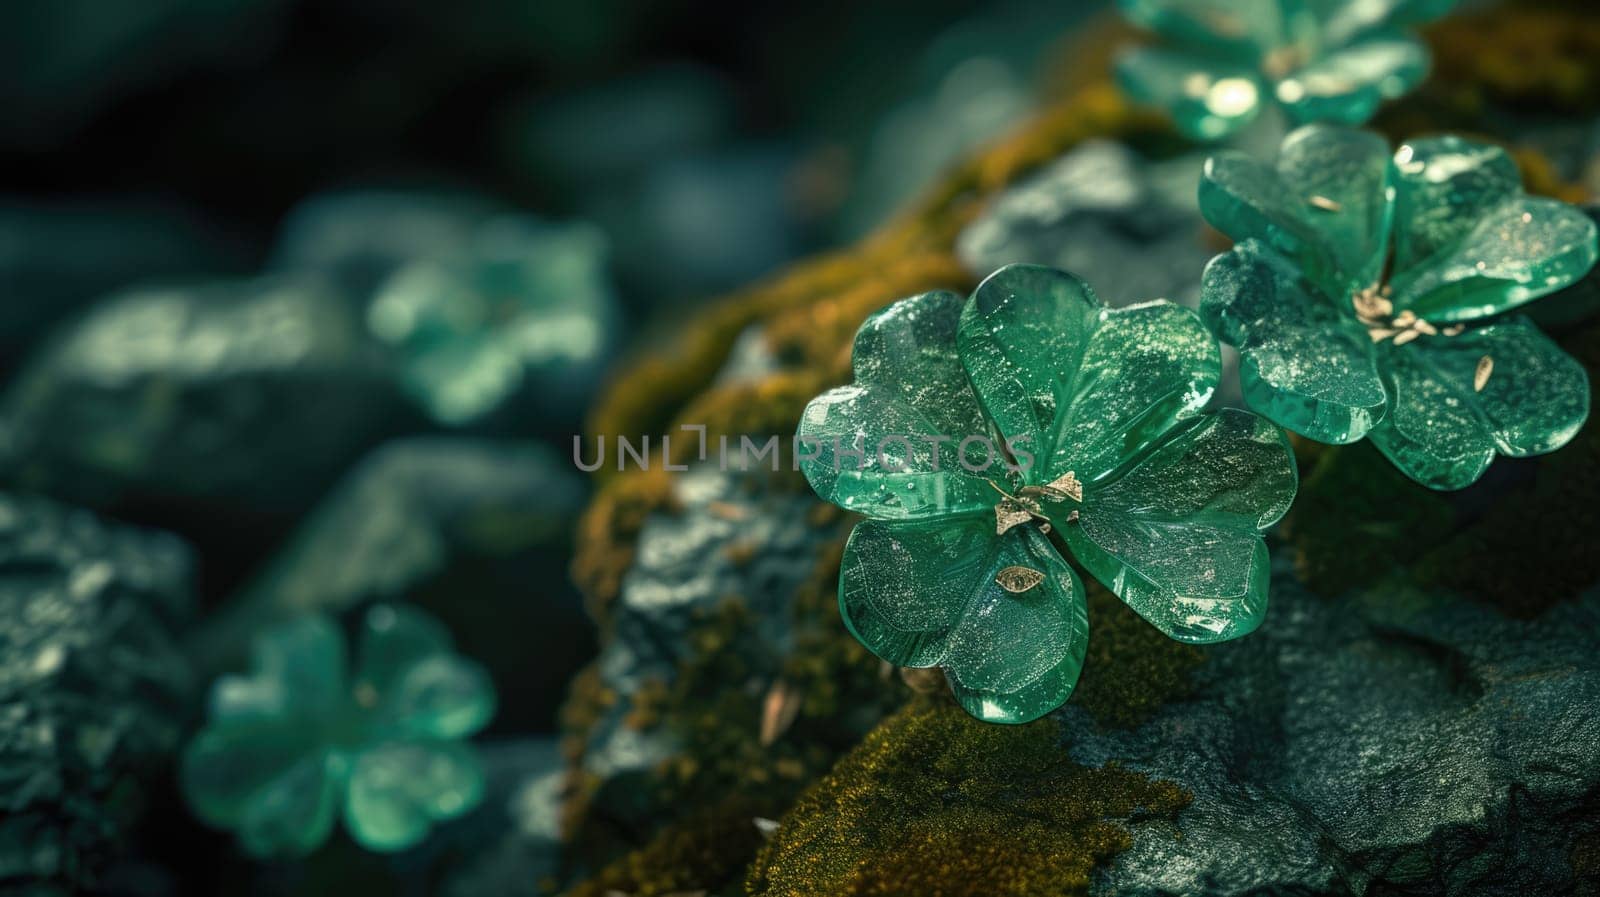 Delicate dewdrop on vibrant green four-leaf clover, stunning natural floral backdrop with soft bokeh. St Patricks Day by JuliaDorian